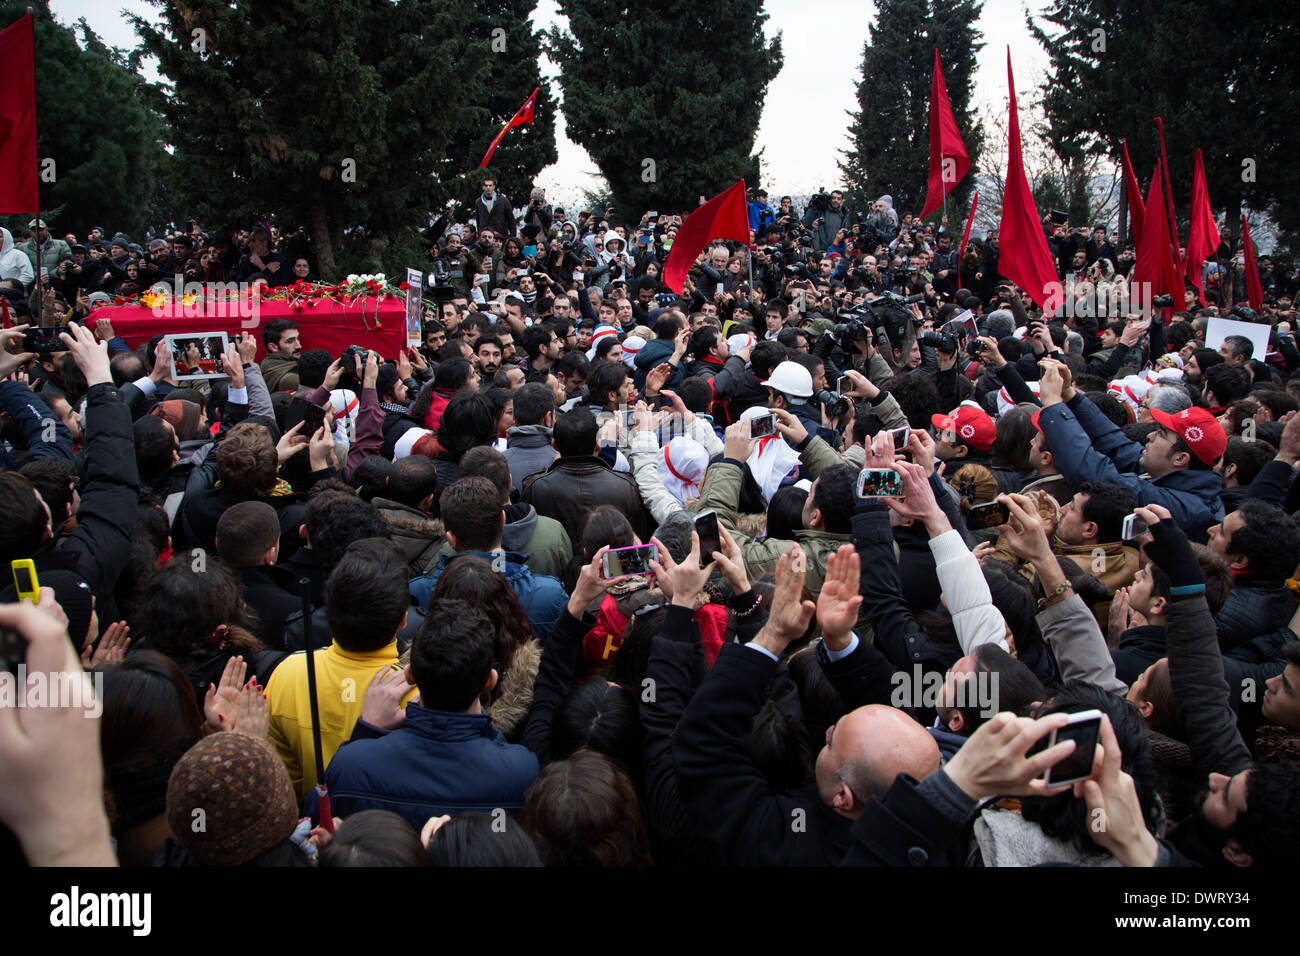 Okmeydani, Istanbul. 12 March 2014. Berkin Elvan, a 15 year old boy hit by a tear gas canister during Gezi Park protests, was celebrated with a burial ceremony where thousands of people from all walks of life attended. Photo by Bikem Ekberzade/Alamy Live News Stock Photo